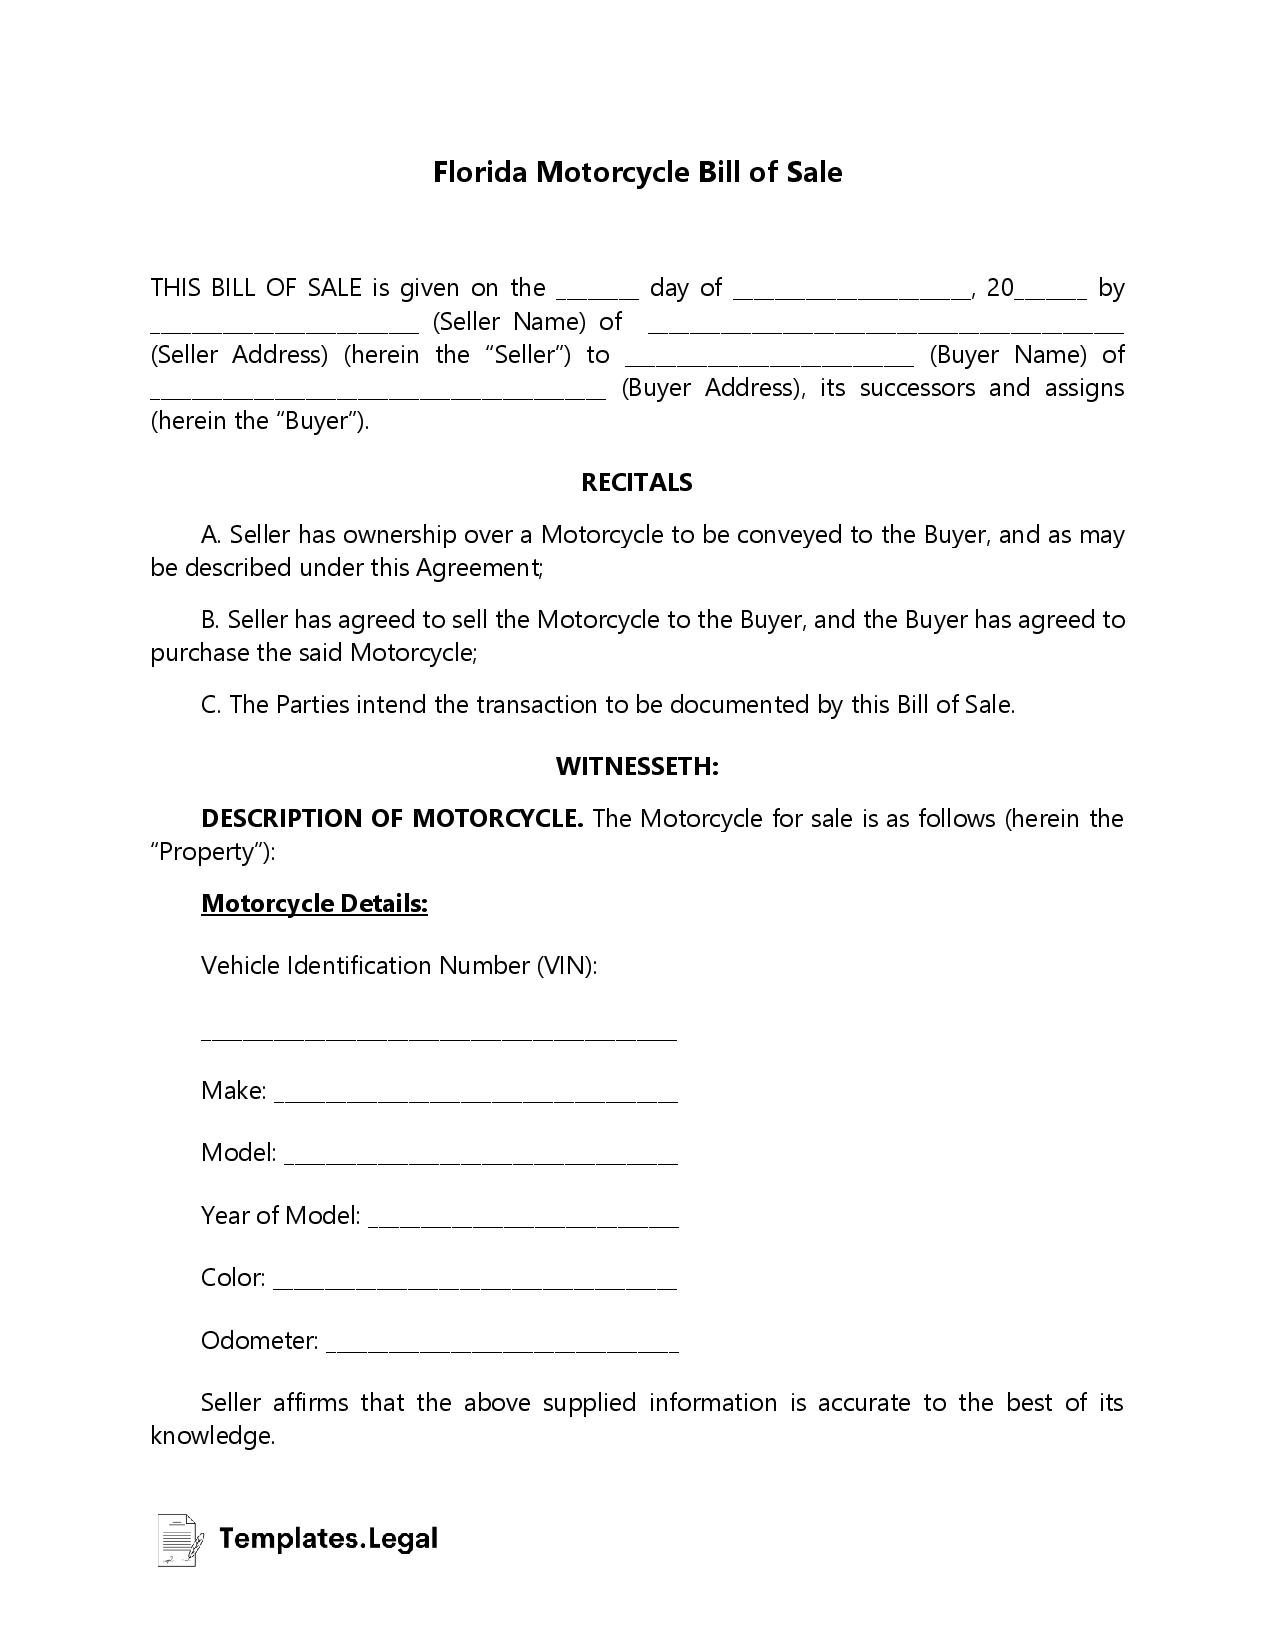 Florida Motorcycle Bill of Sale - Templates.Legal